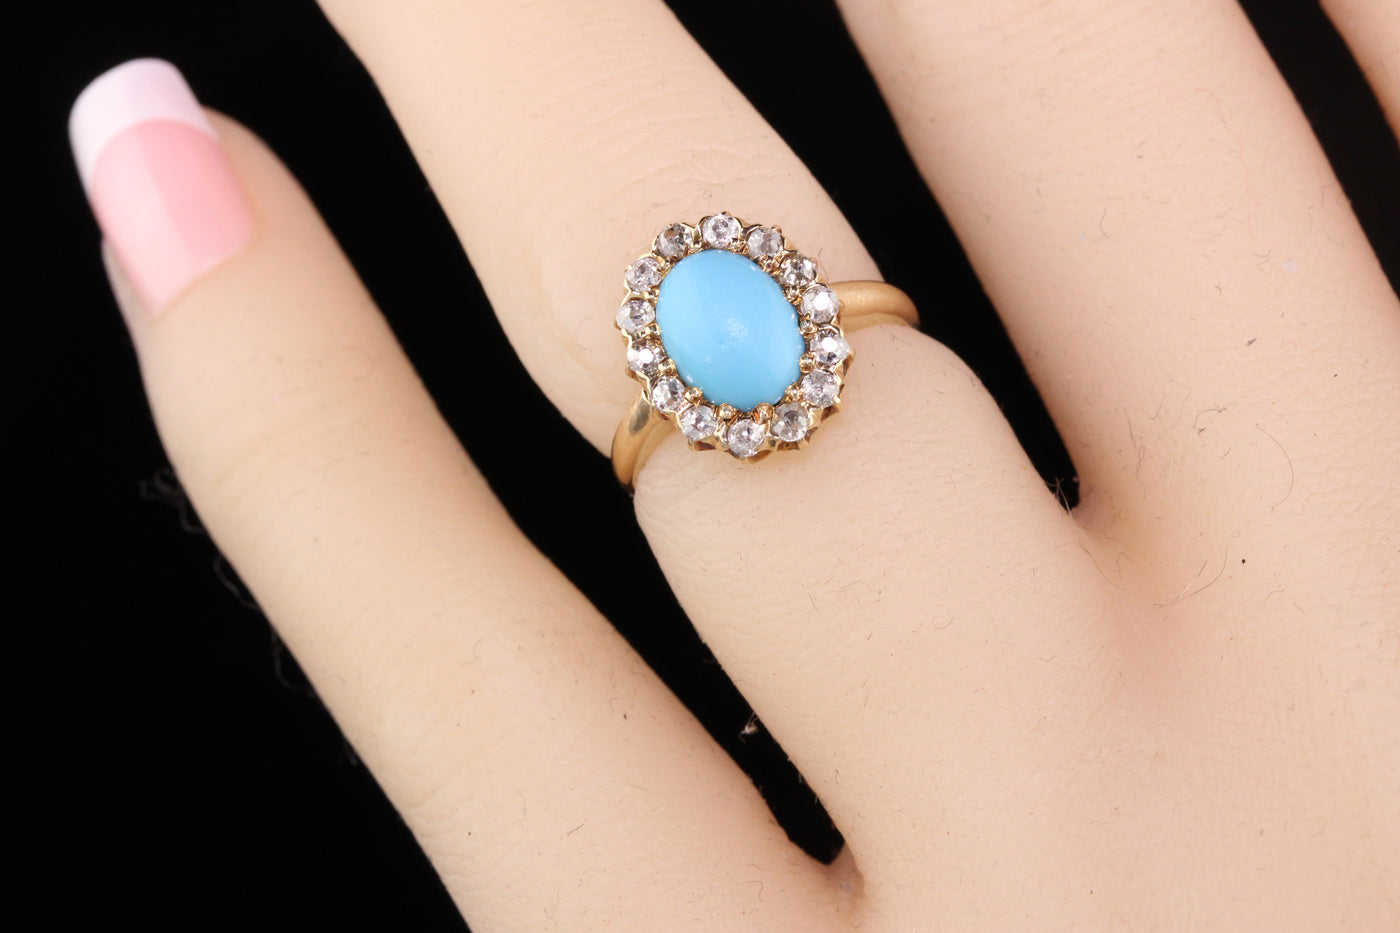 Antique Victorian Old Miner Cut Diamonds and Turquoise Ring